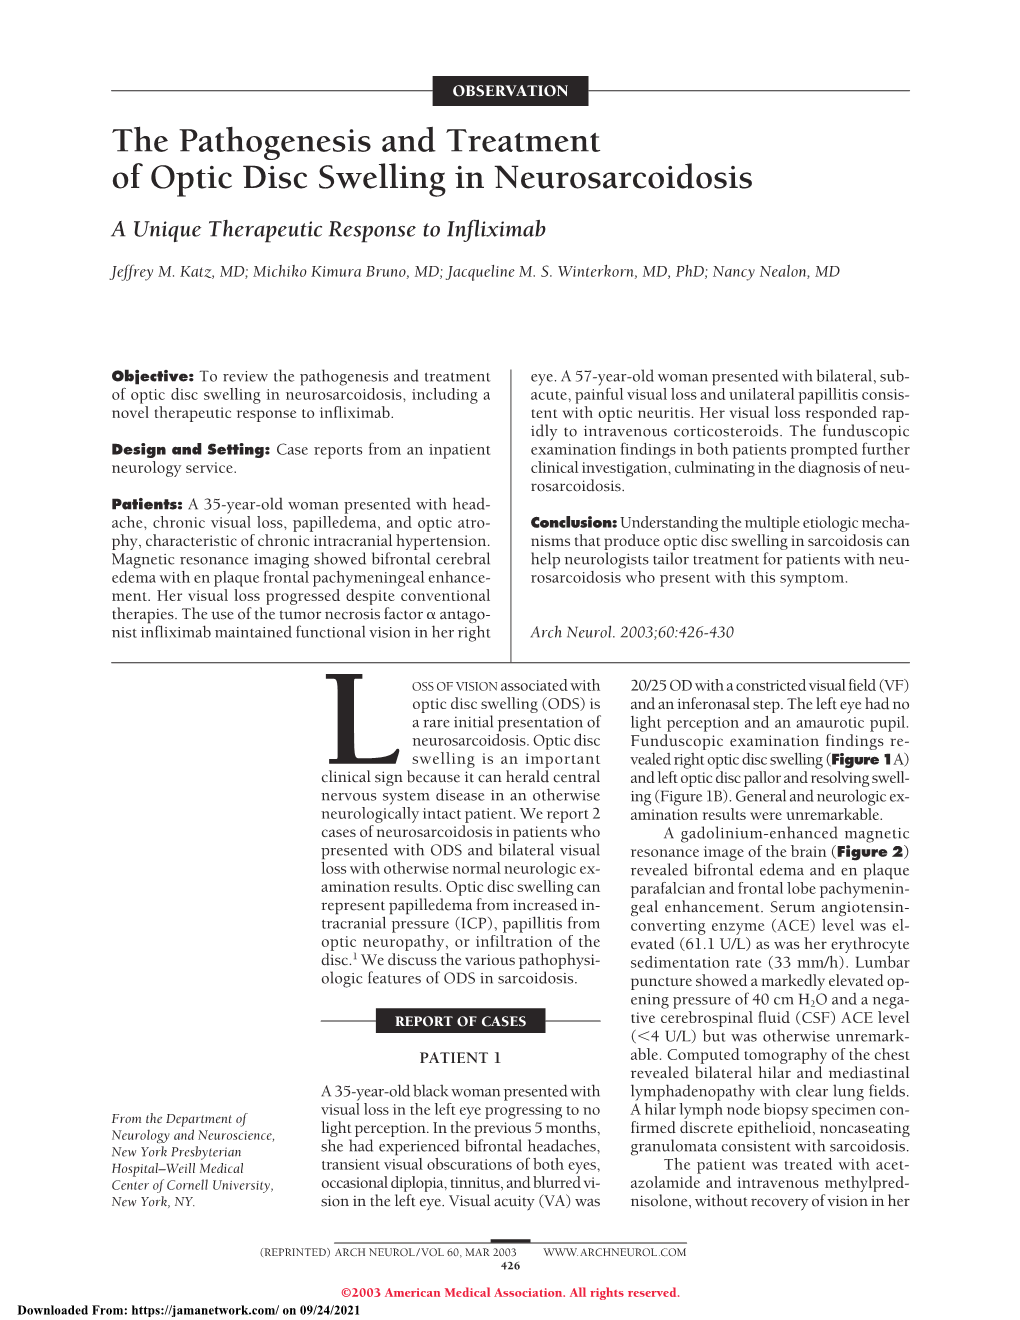 The Pathogenesis and Treatment of Optic Disc Swelling in Neurosarcoidosis a Unique Therapeutic Response to Infliximab